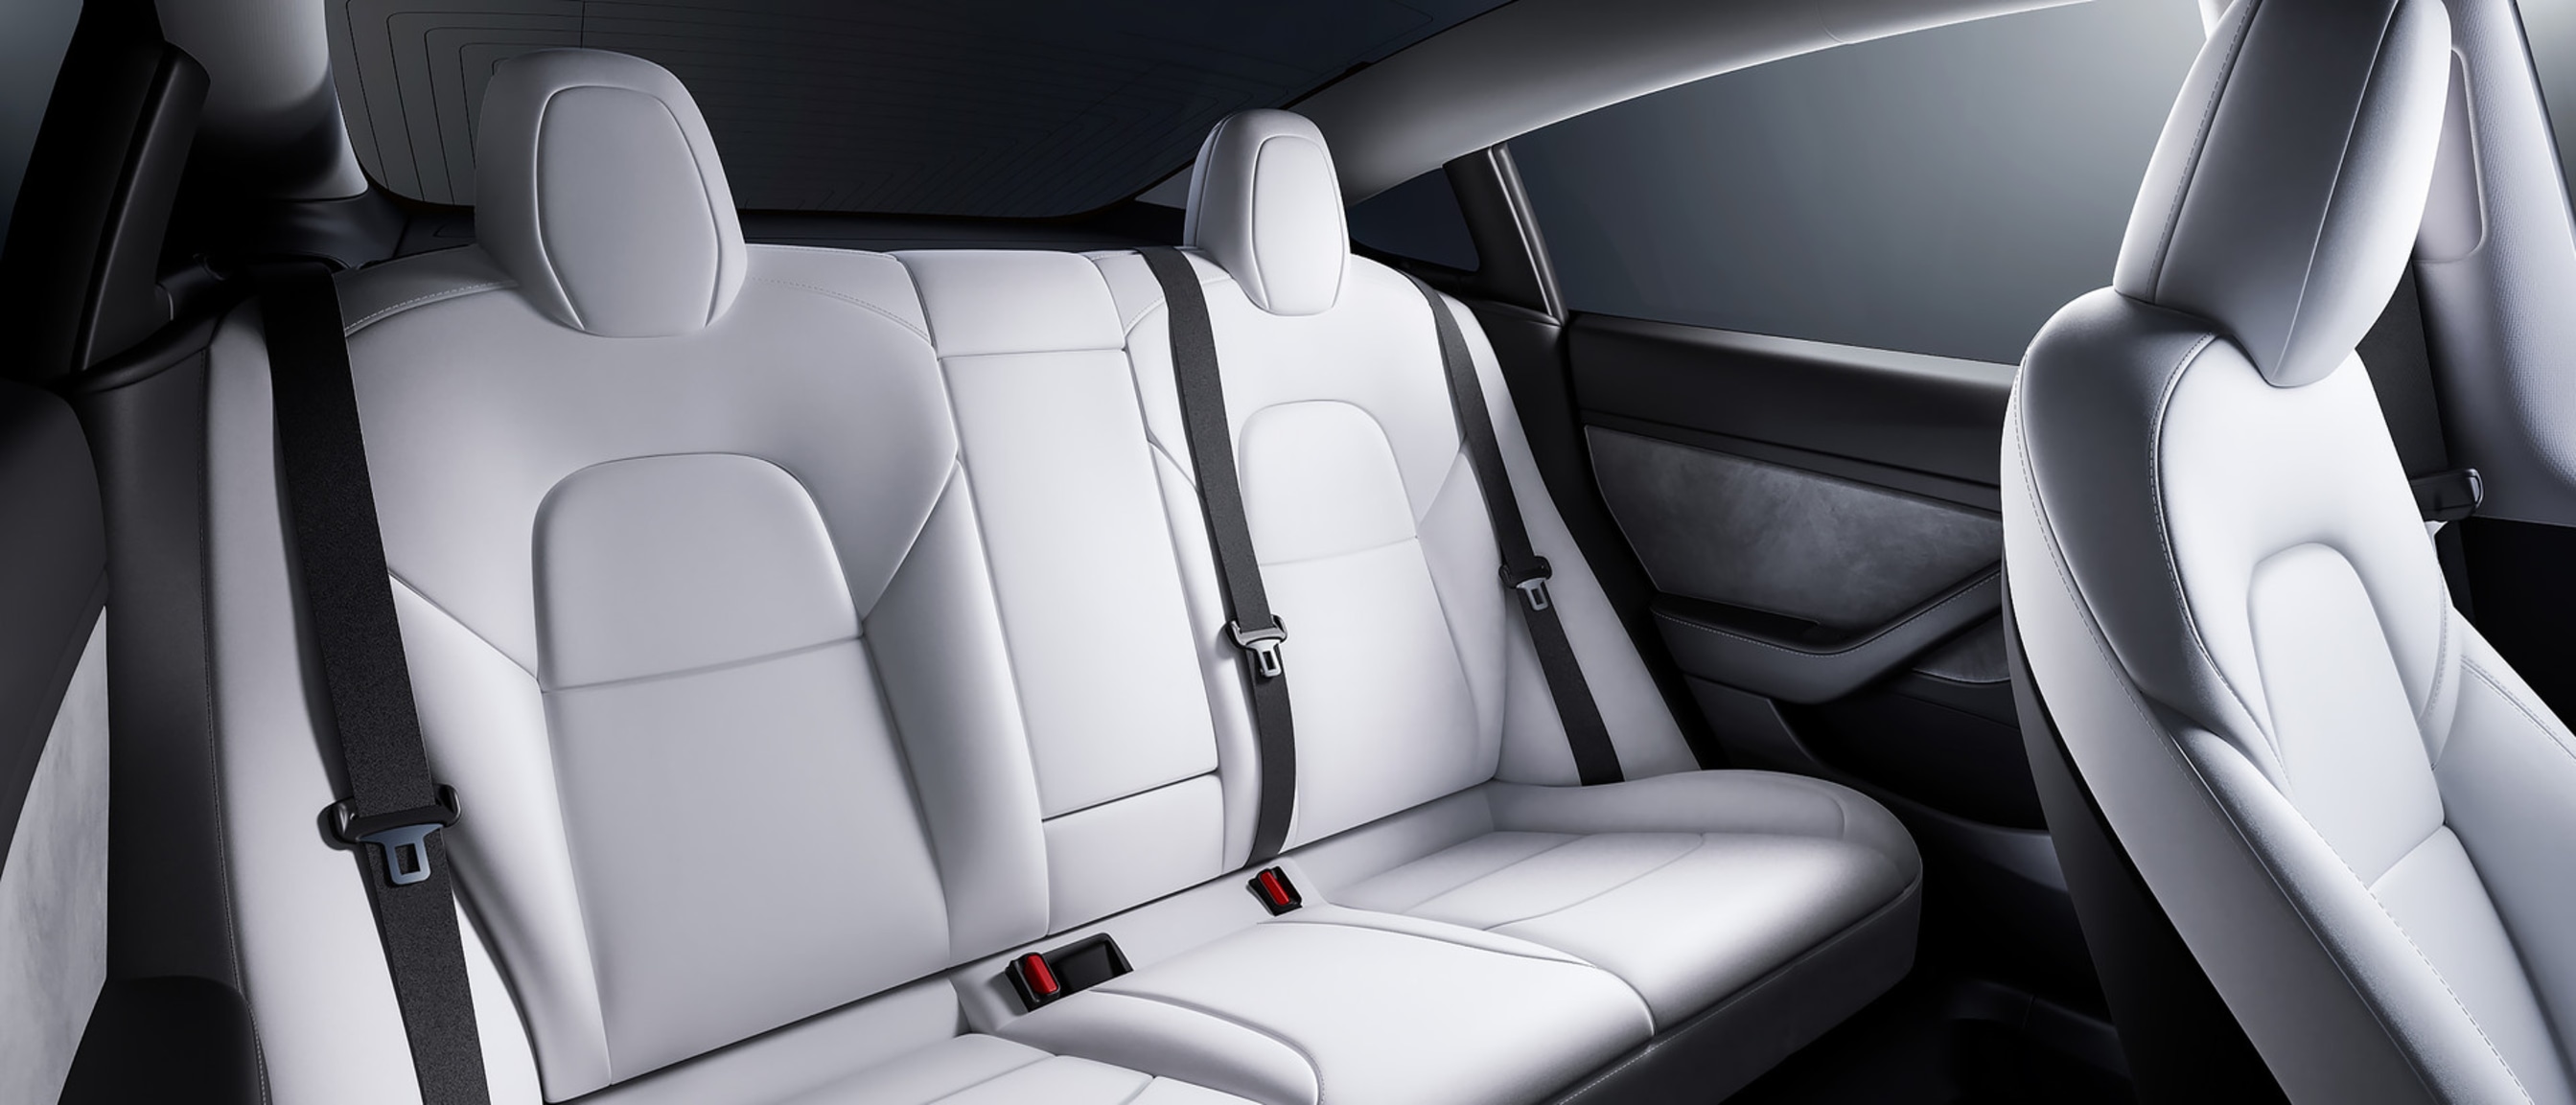 View of the spacious backseat of a Model 3 with white interior